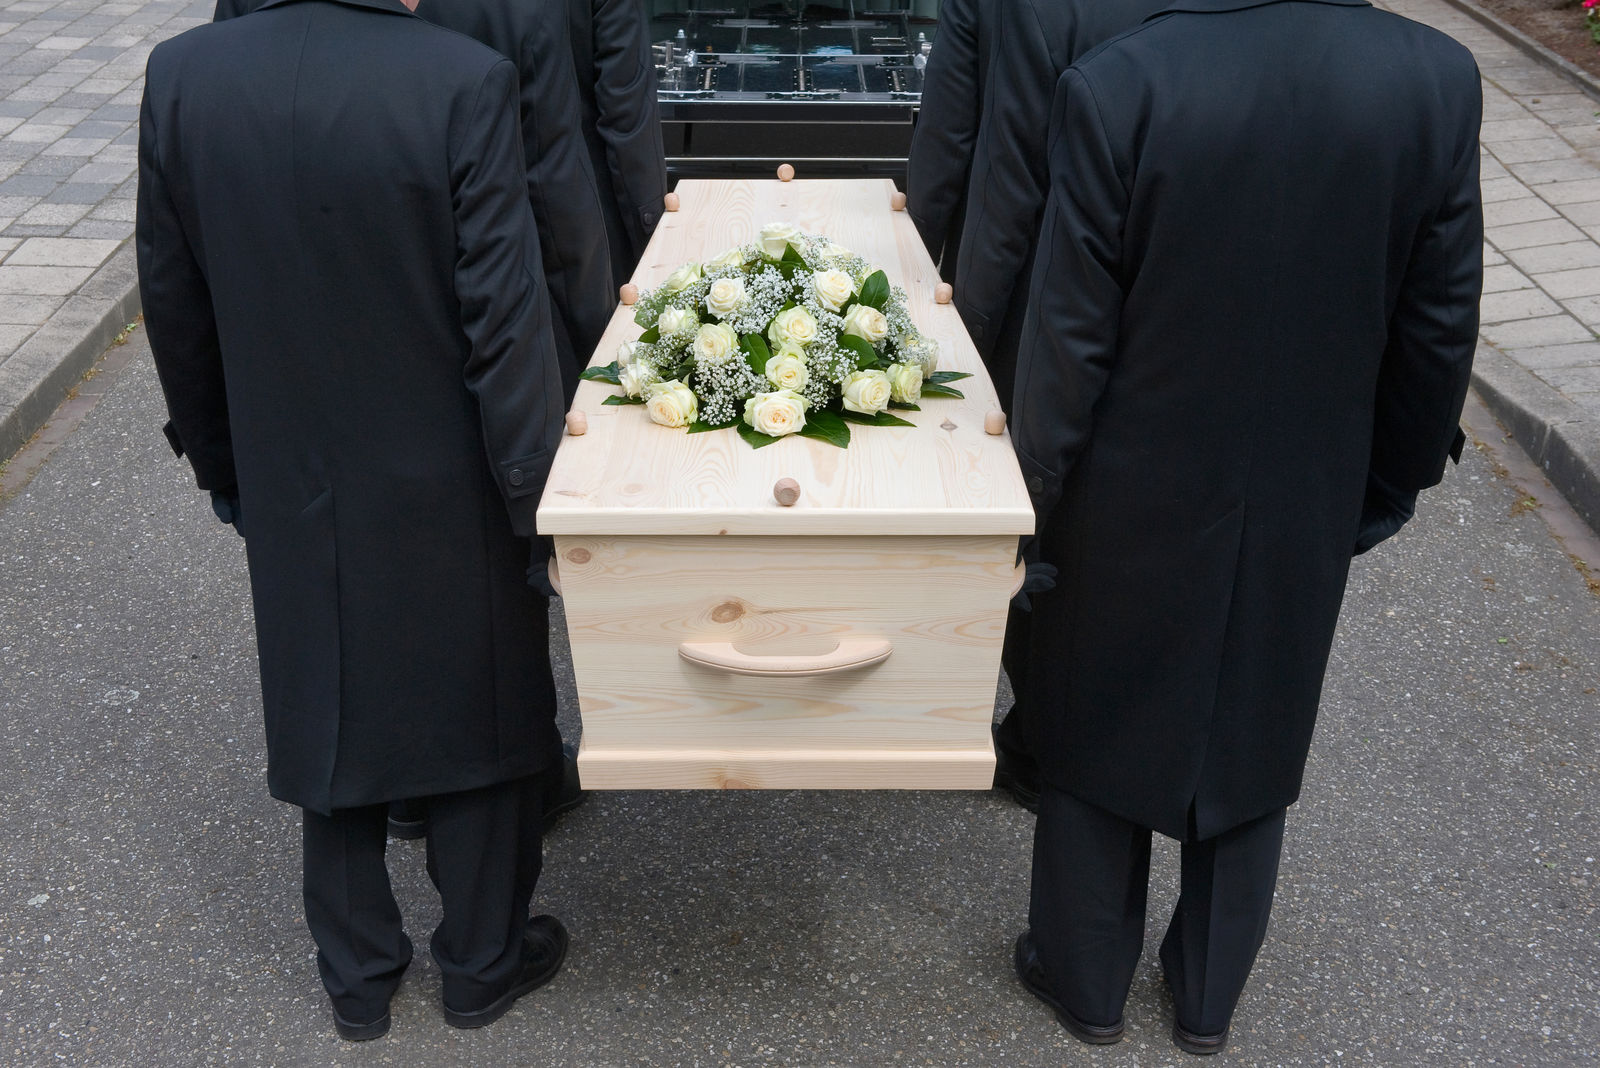 Can a funeral home be a life insurance beneficiary?